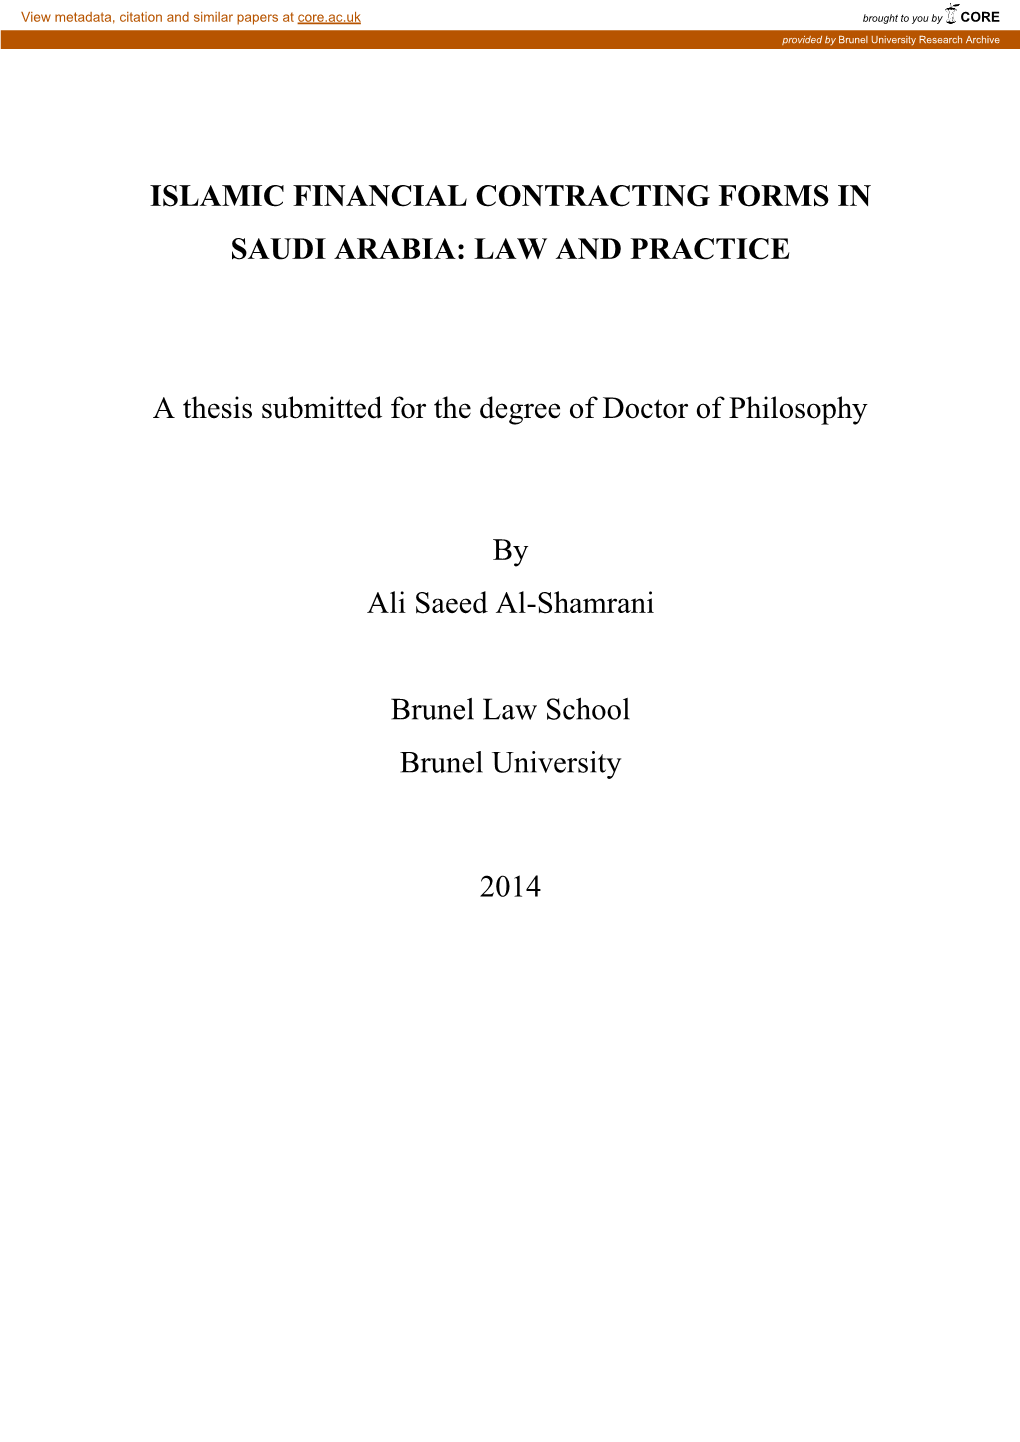 Islamic Financial Contracting Forms in Saudi Arabia: Law and Practice